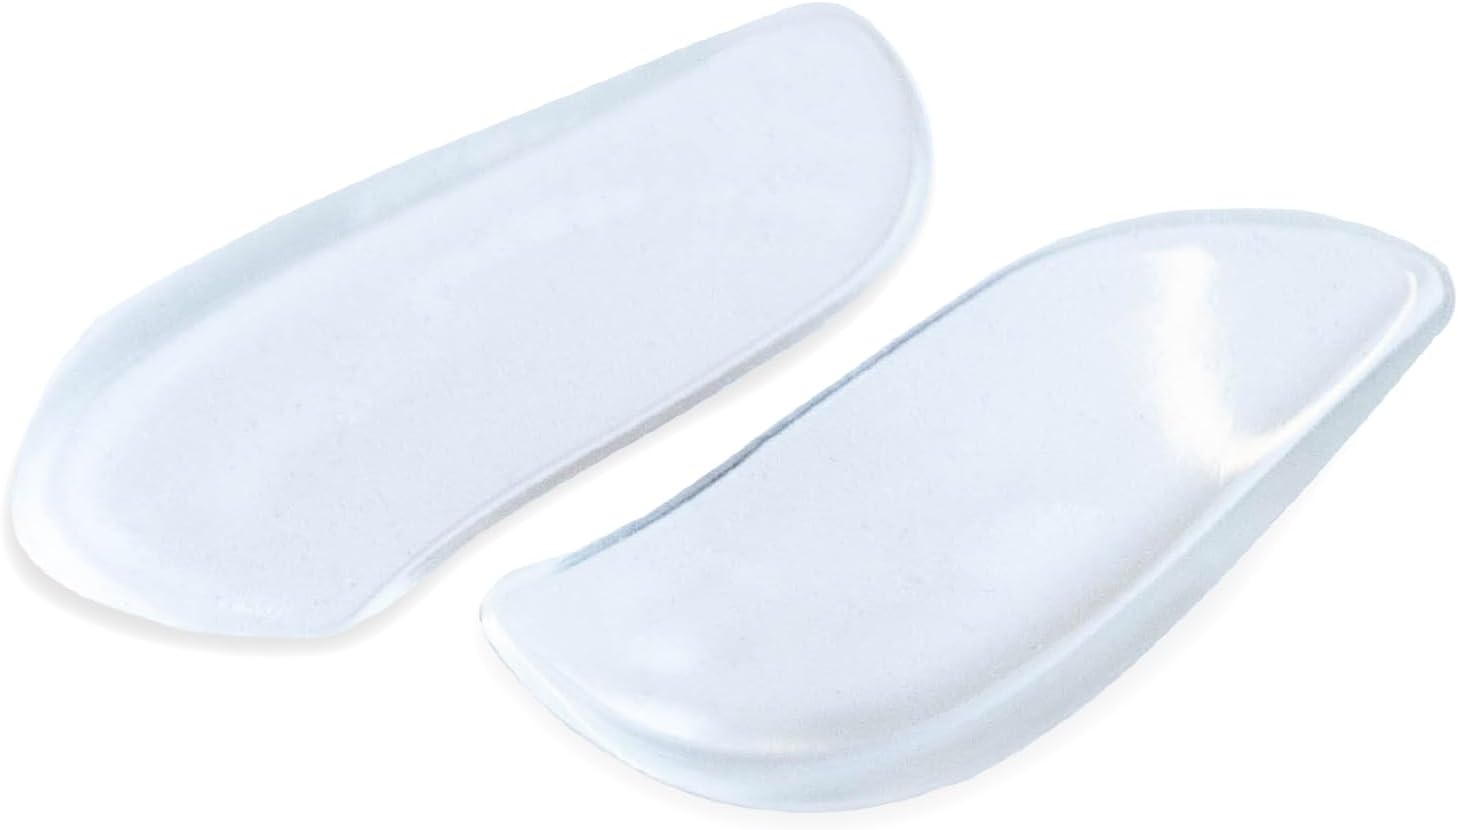 BraceAbility Medial Lateral Heel Wedge Silicone Insoles (Pair) - Supination Pronation Corrective Adhesive Shoe Inserts for Foot Alignment, Knock Knee Pain, Bow Legs, Osteoarthritis